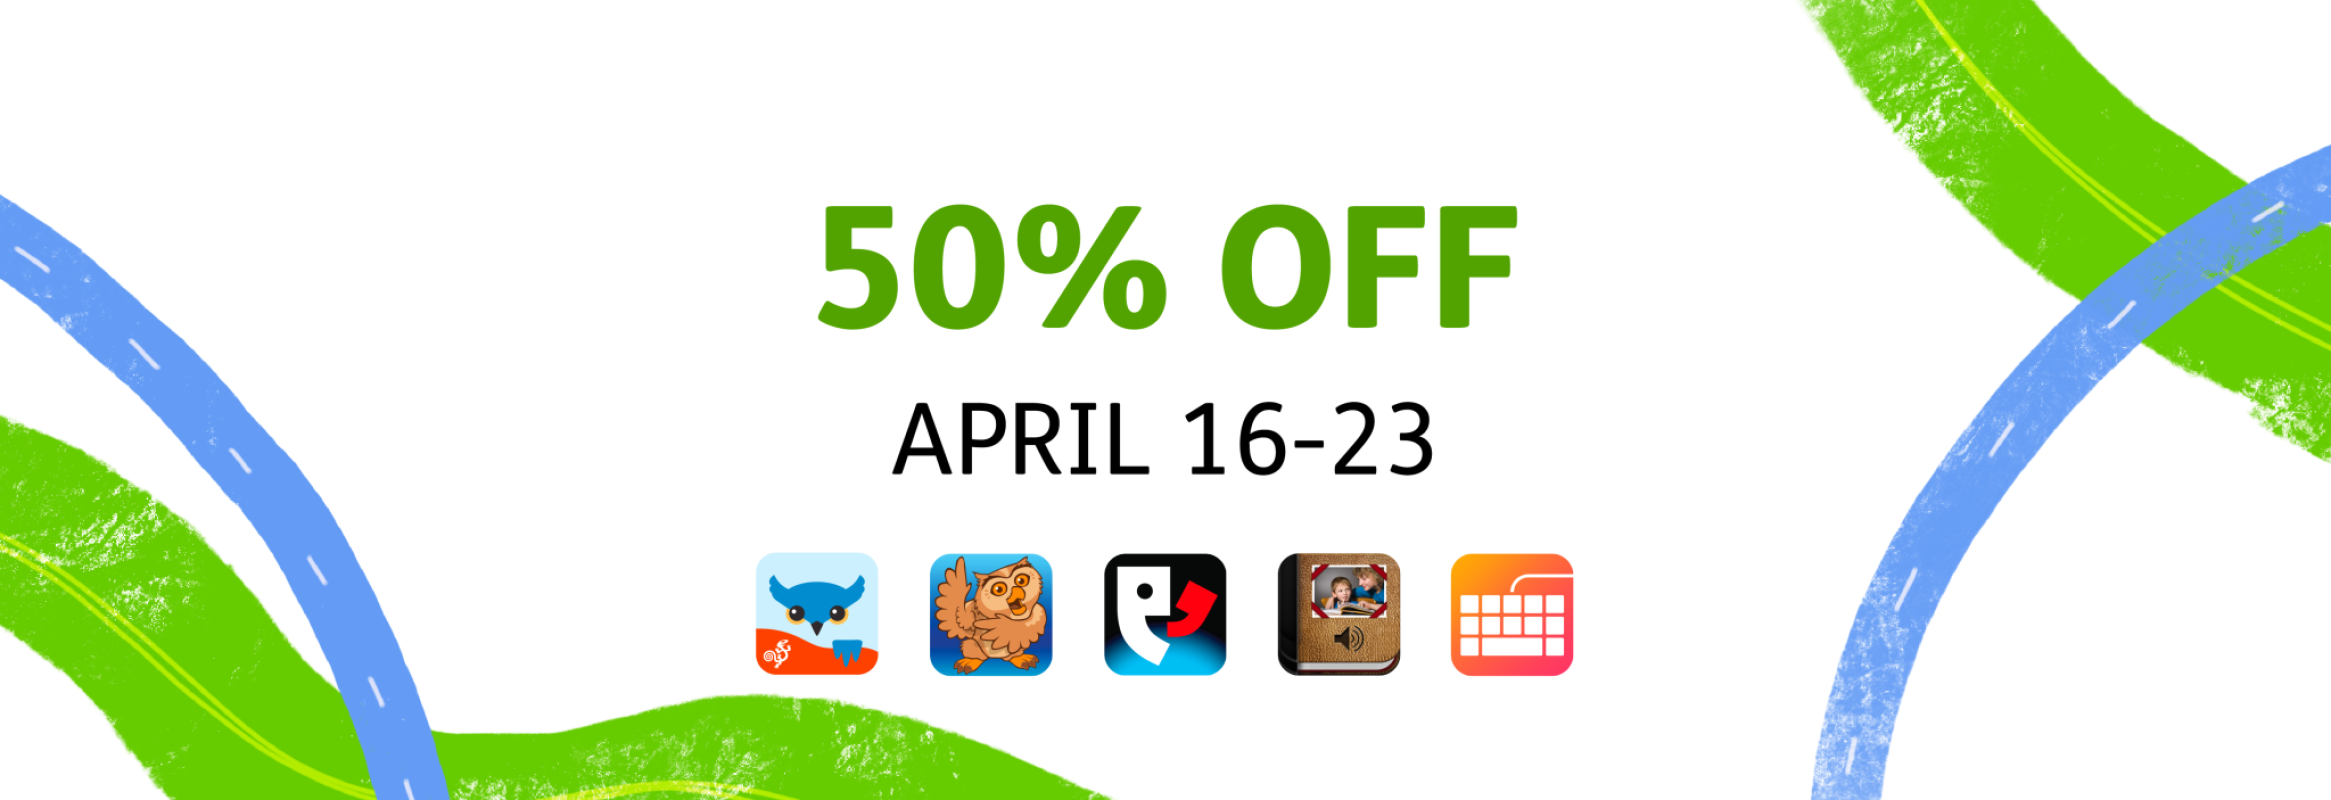 50% off, April 16-23 on Proloquo, Proloquo2Go, Proloquo4Text, Pictello, and Keeble